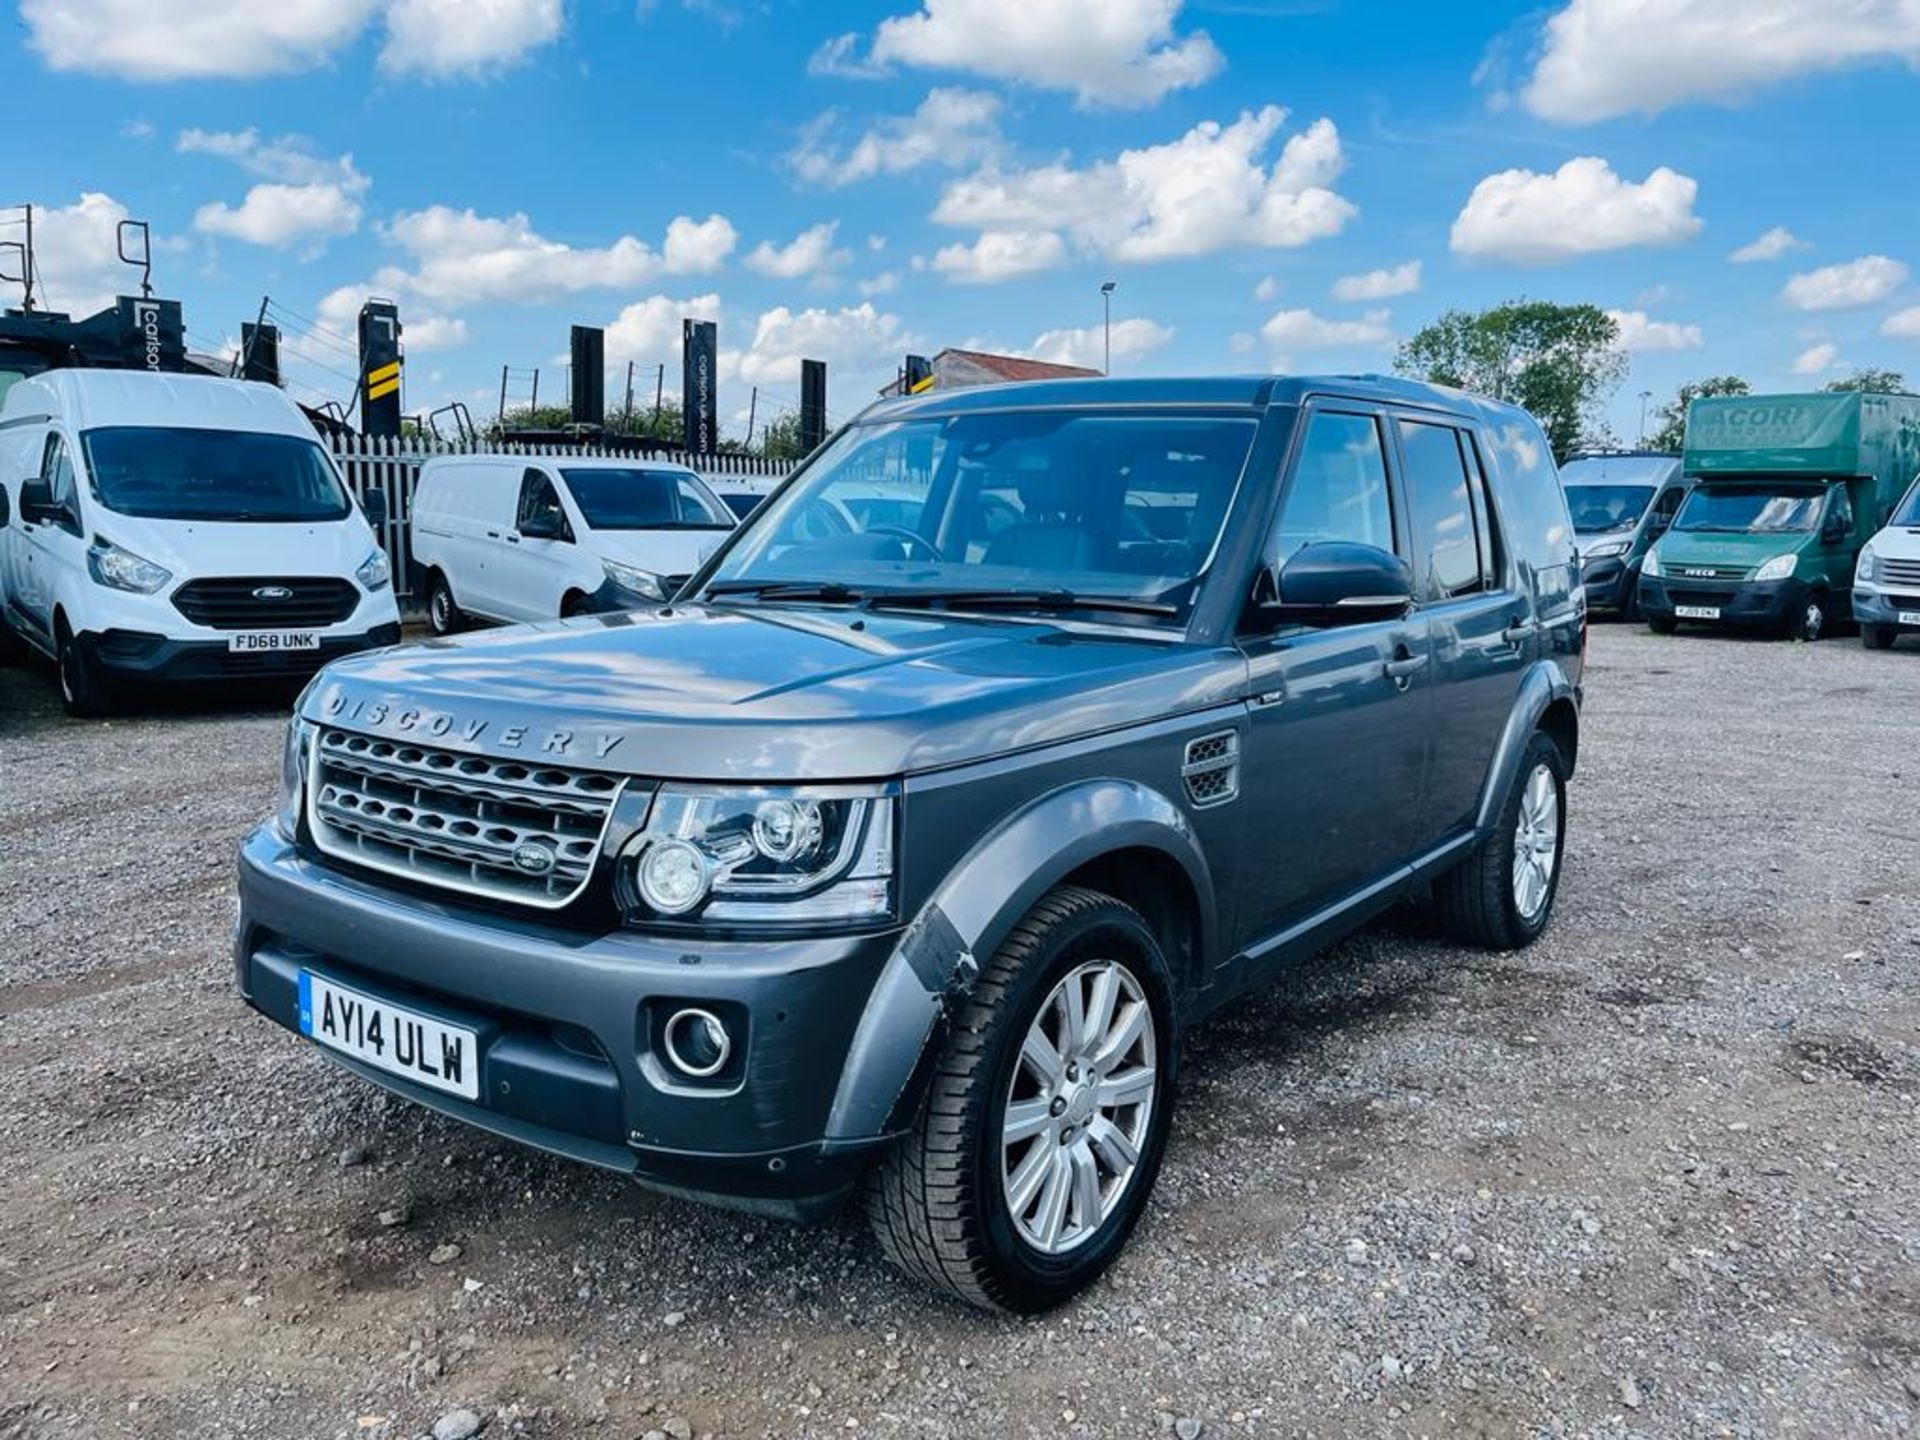 ** ON SALE ** Land Rover Discovery 4 3.0 SDV6 XS CommandShift 2014 '14 Reg' Sat Nav - A/C - 4WD - Image 3 of 26